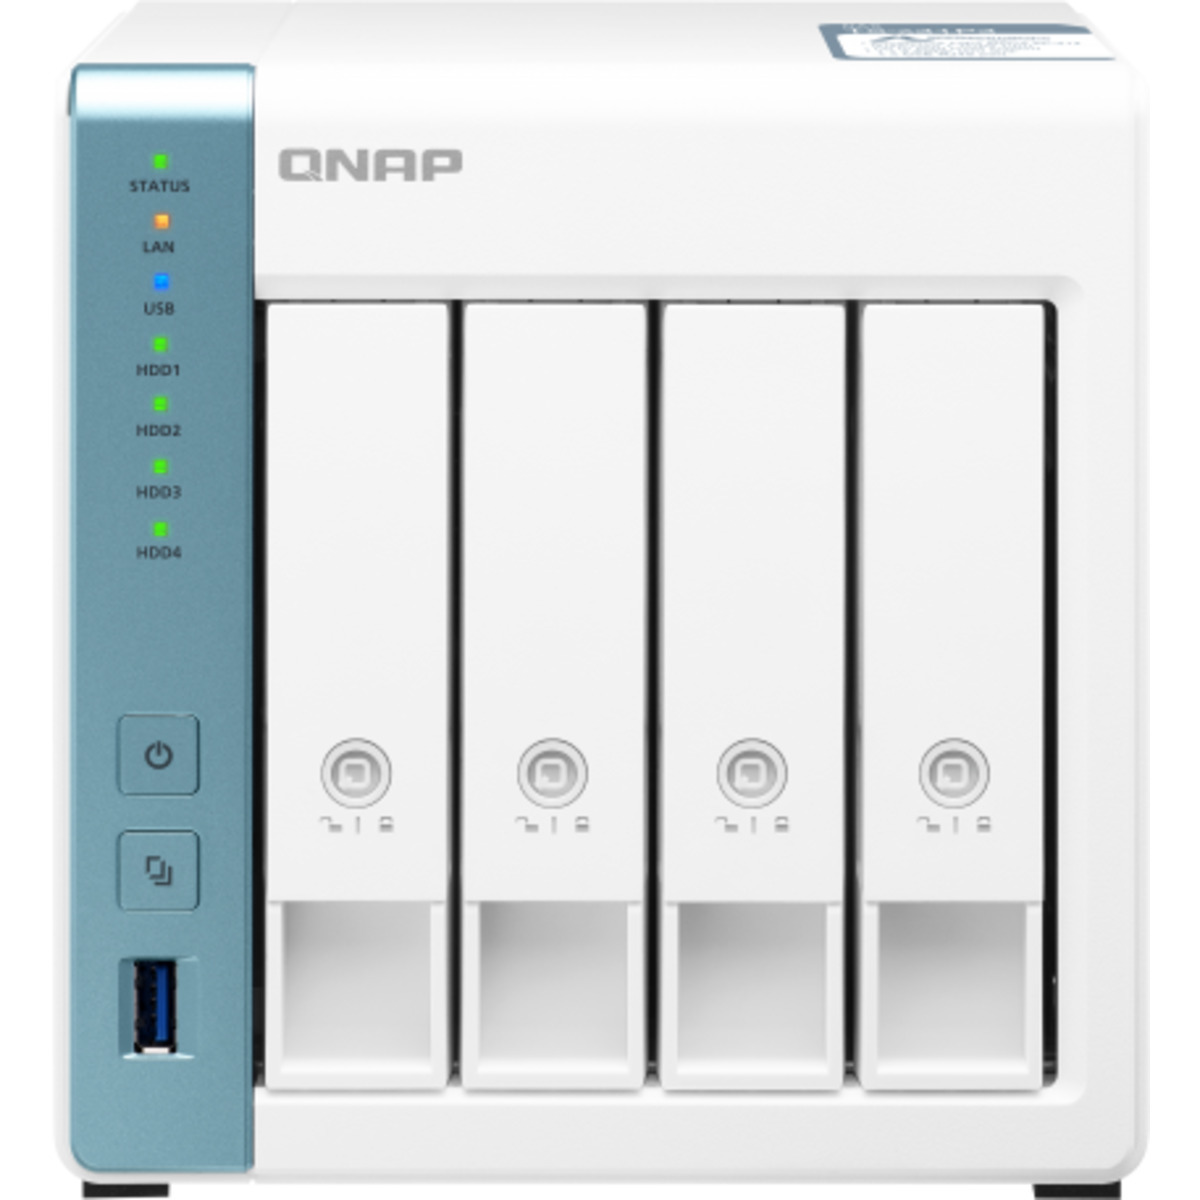 buy $1023 QNAP TS-431P3 16tb Desktop NAS - Network Attached Storage Device 4x4000gb Western Digital Blue WD40EZRZ 3.5 5400rpm SATA 6Gb/s HDD CONSUMER Class Drives Installed - Burn-In Tested - FREE RAM UPGRADE - nas headquarters buy network attached storage server device das new raid-5 free shipping usa christmas new year holiday sale TS-431P3